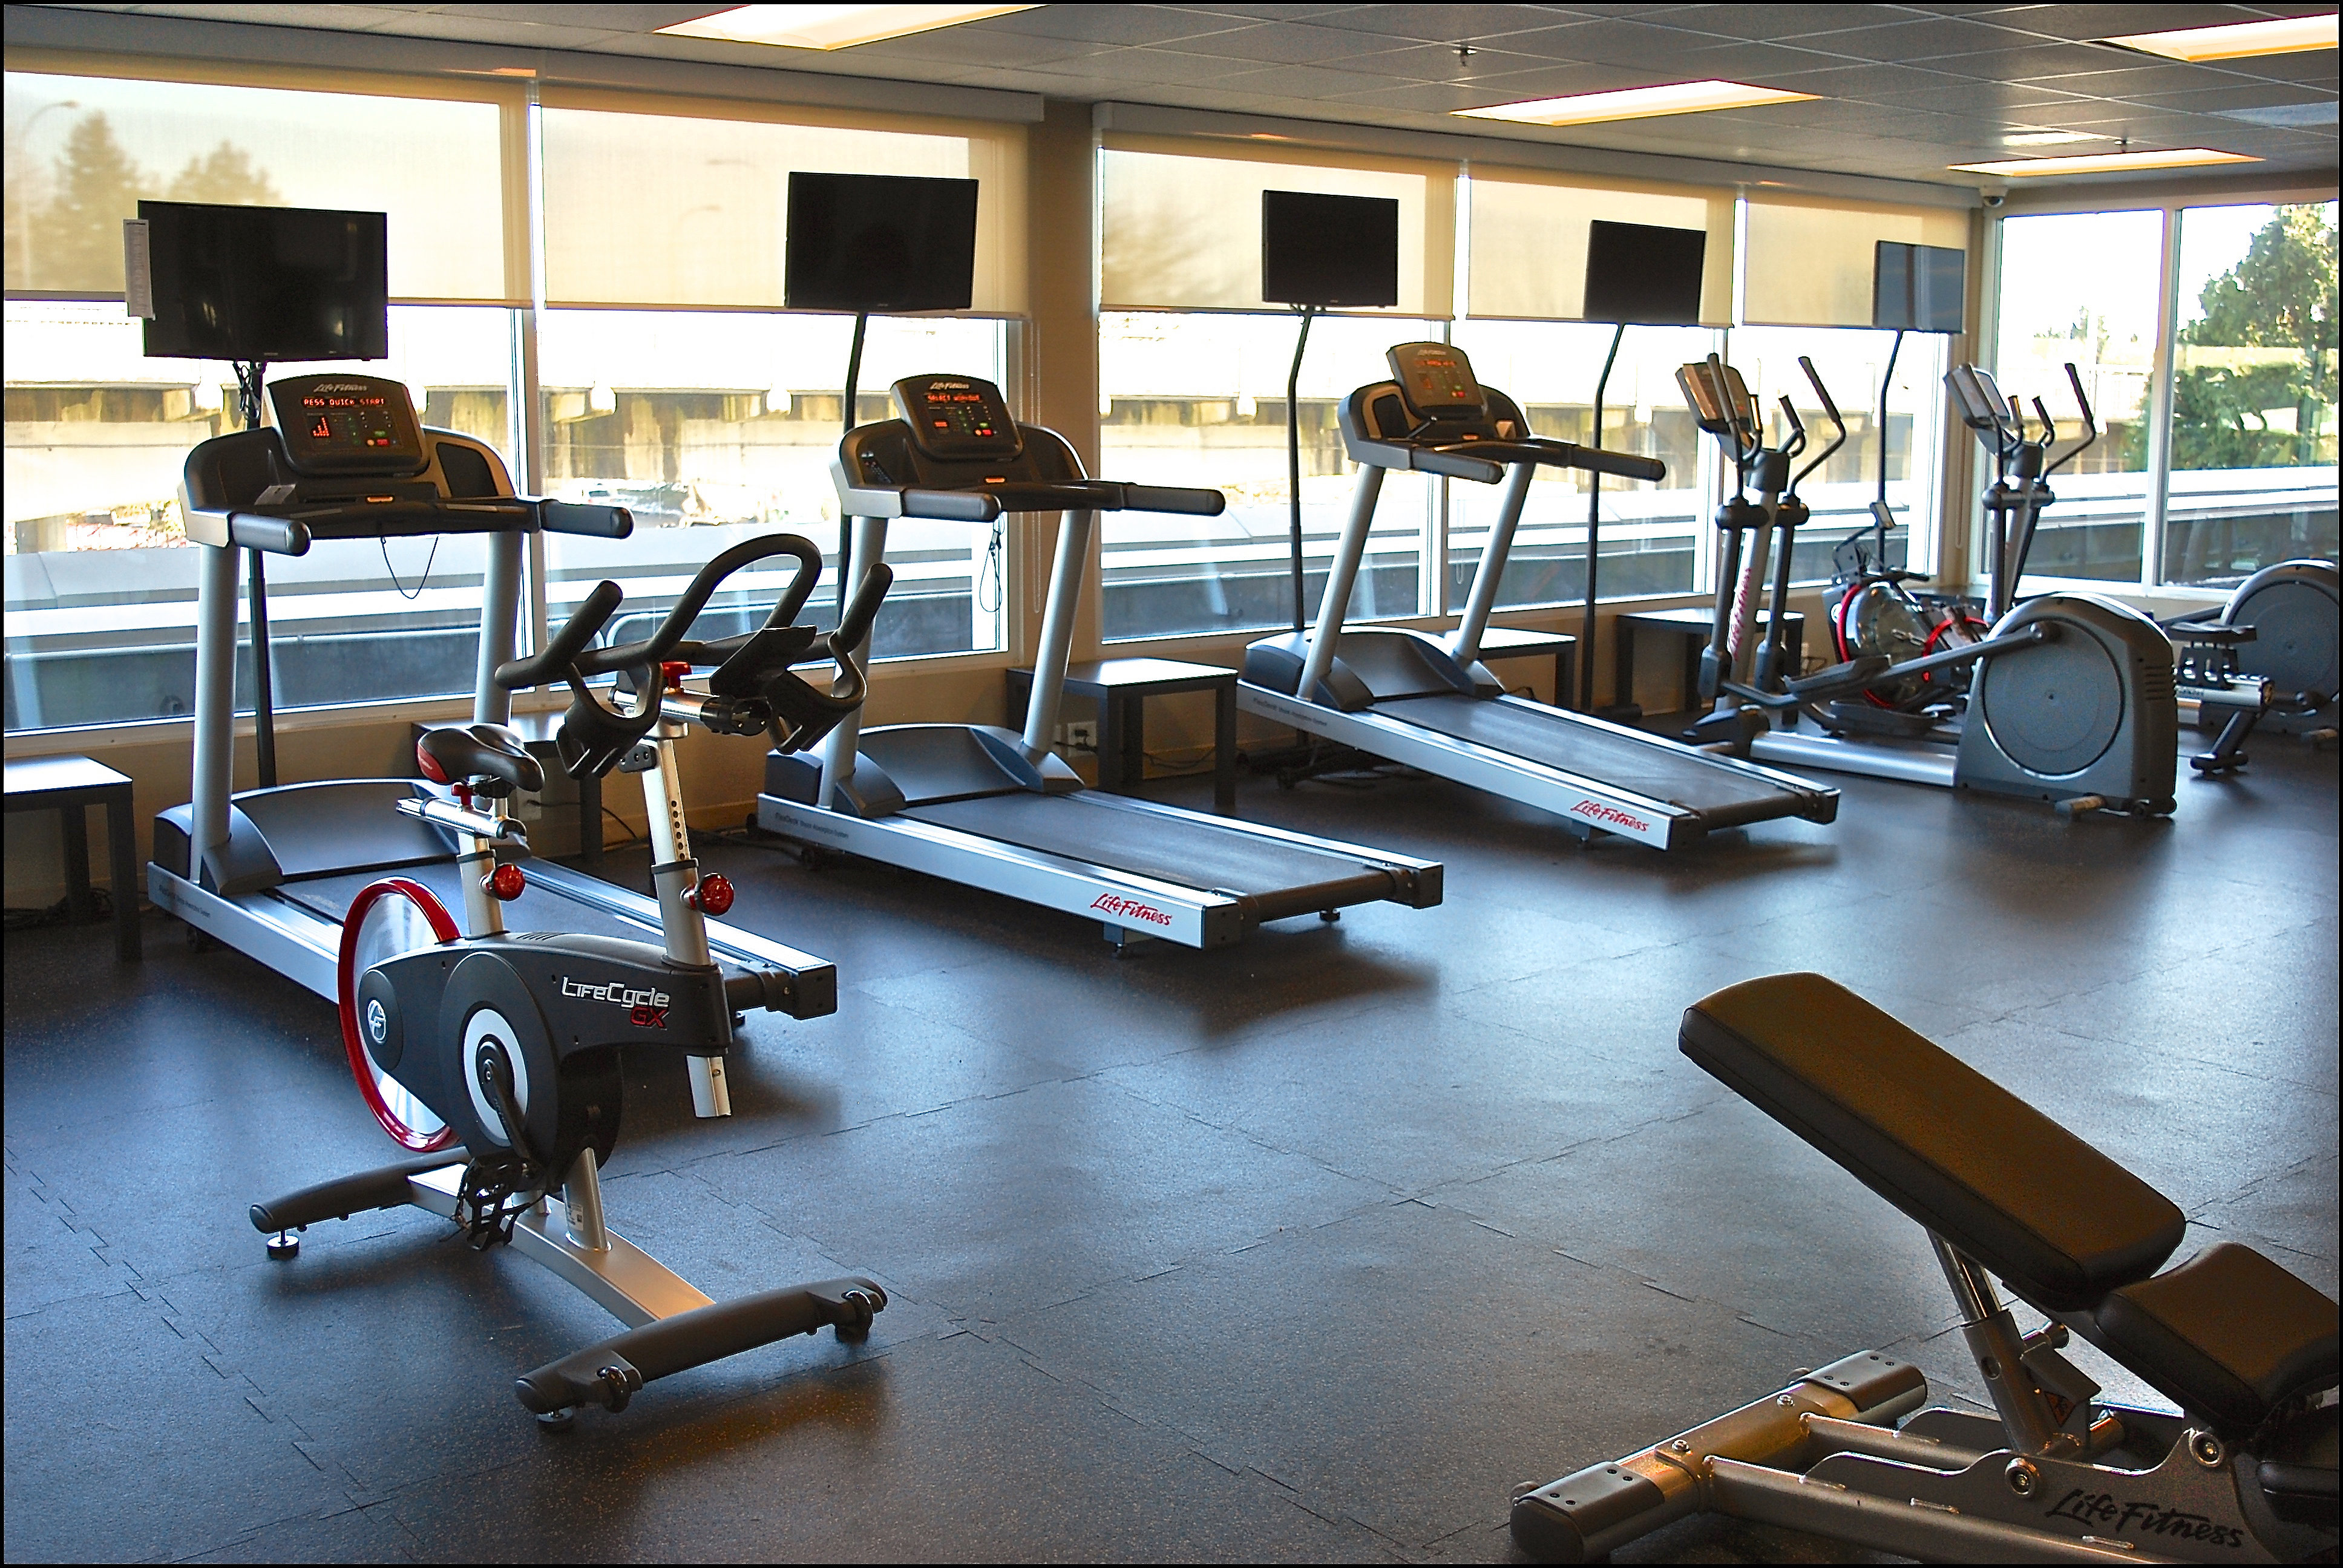 Energize your stay in our on-site fitness center.